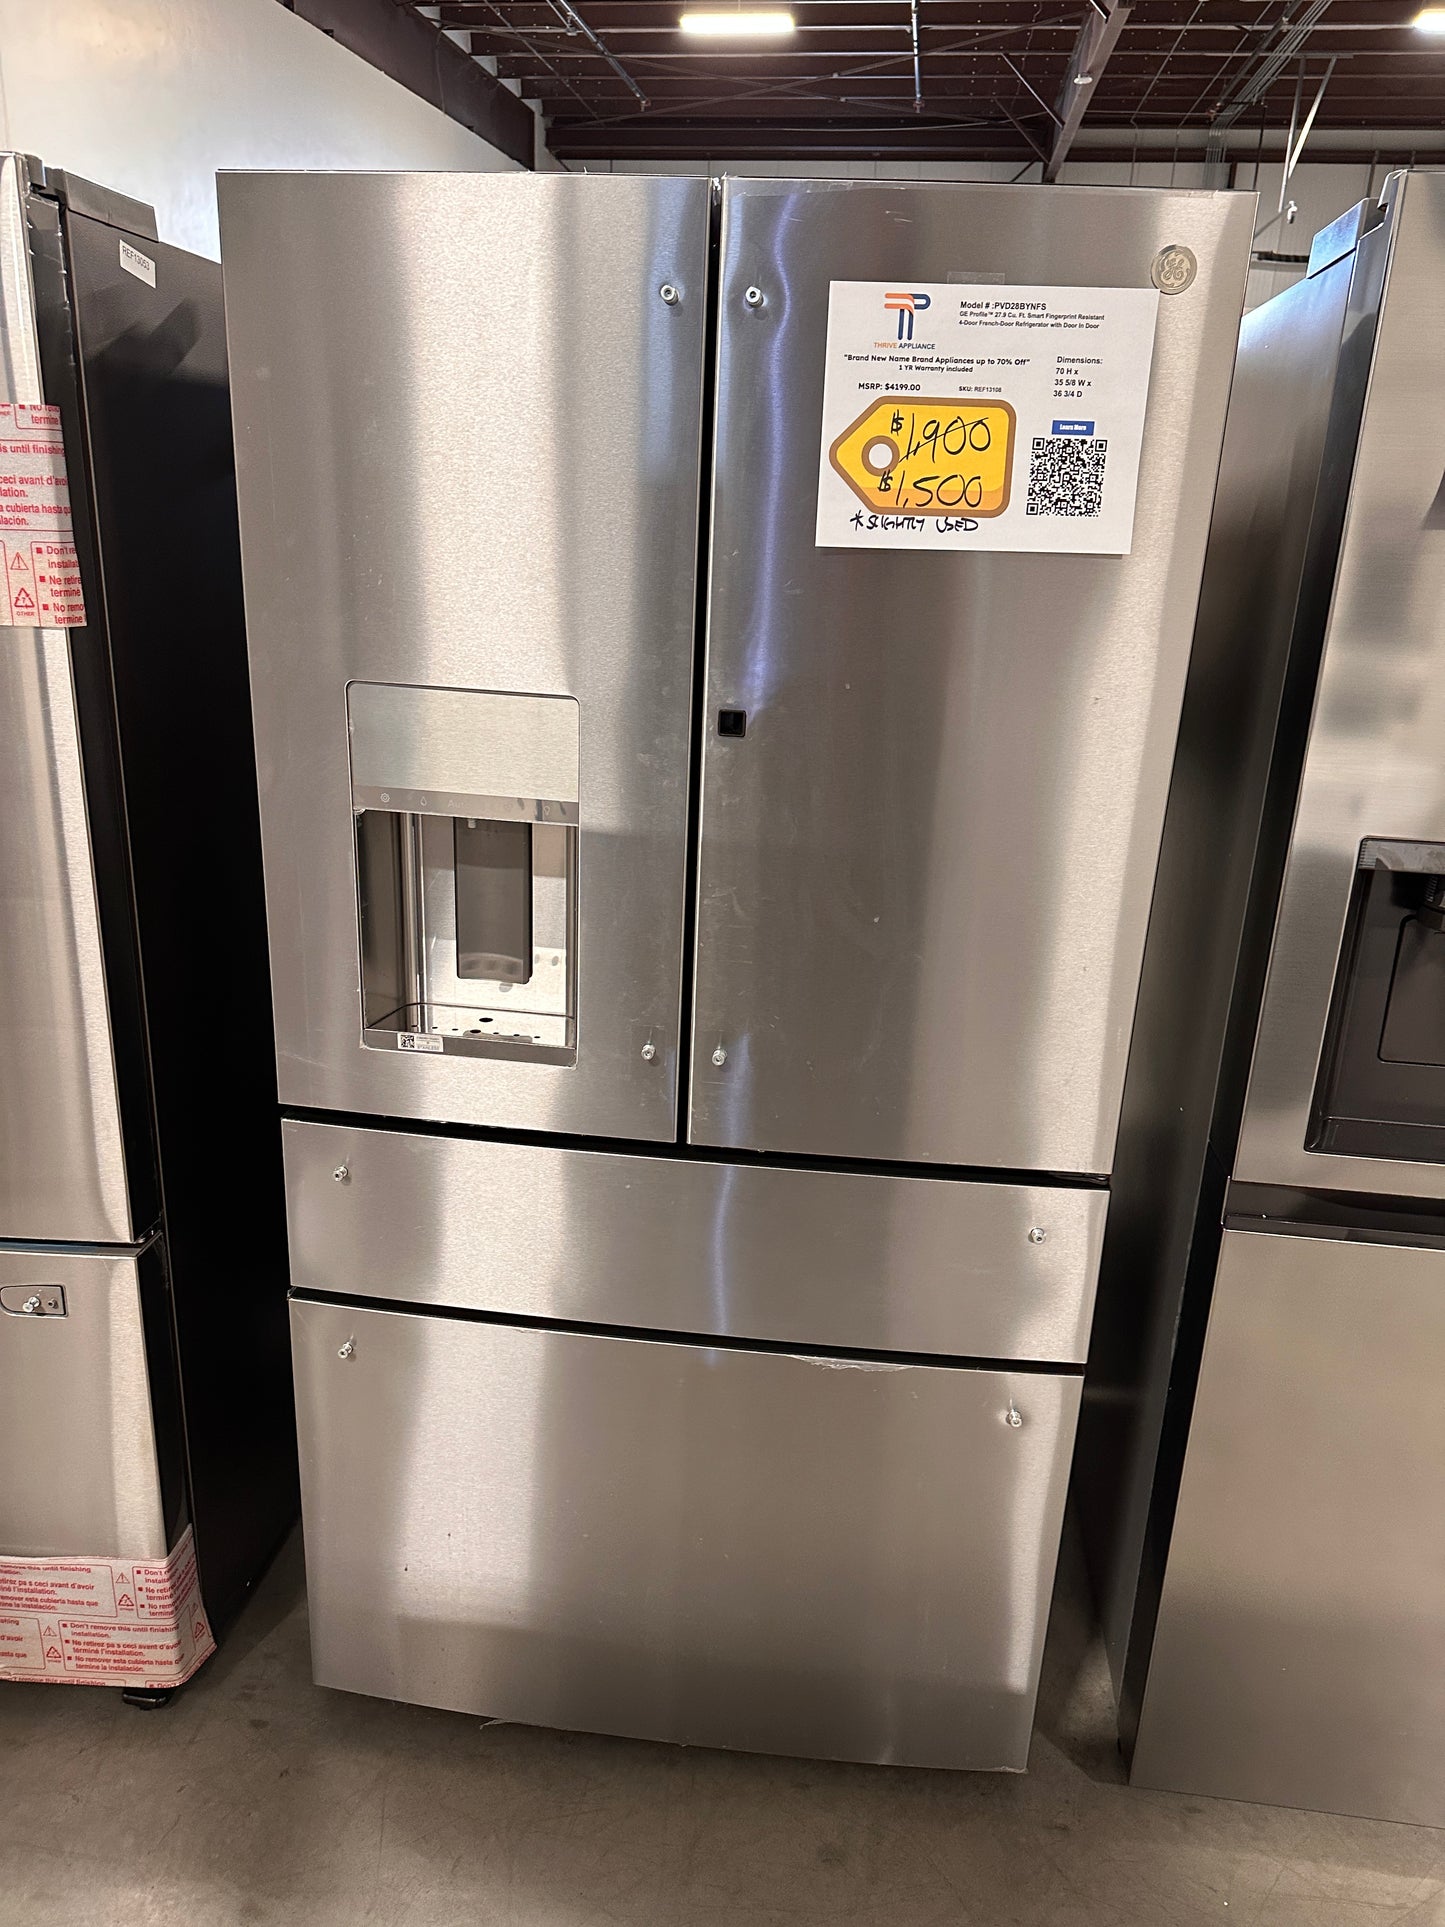 GENTLY USED - LIKE NEW - GE PROFILE SMART REFRIGERATOR MODEL:PVD28BYNFS  REF13108